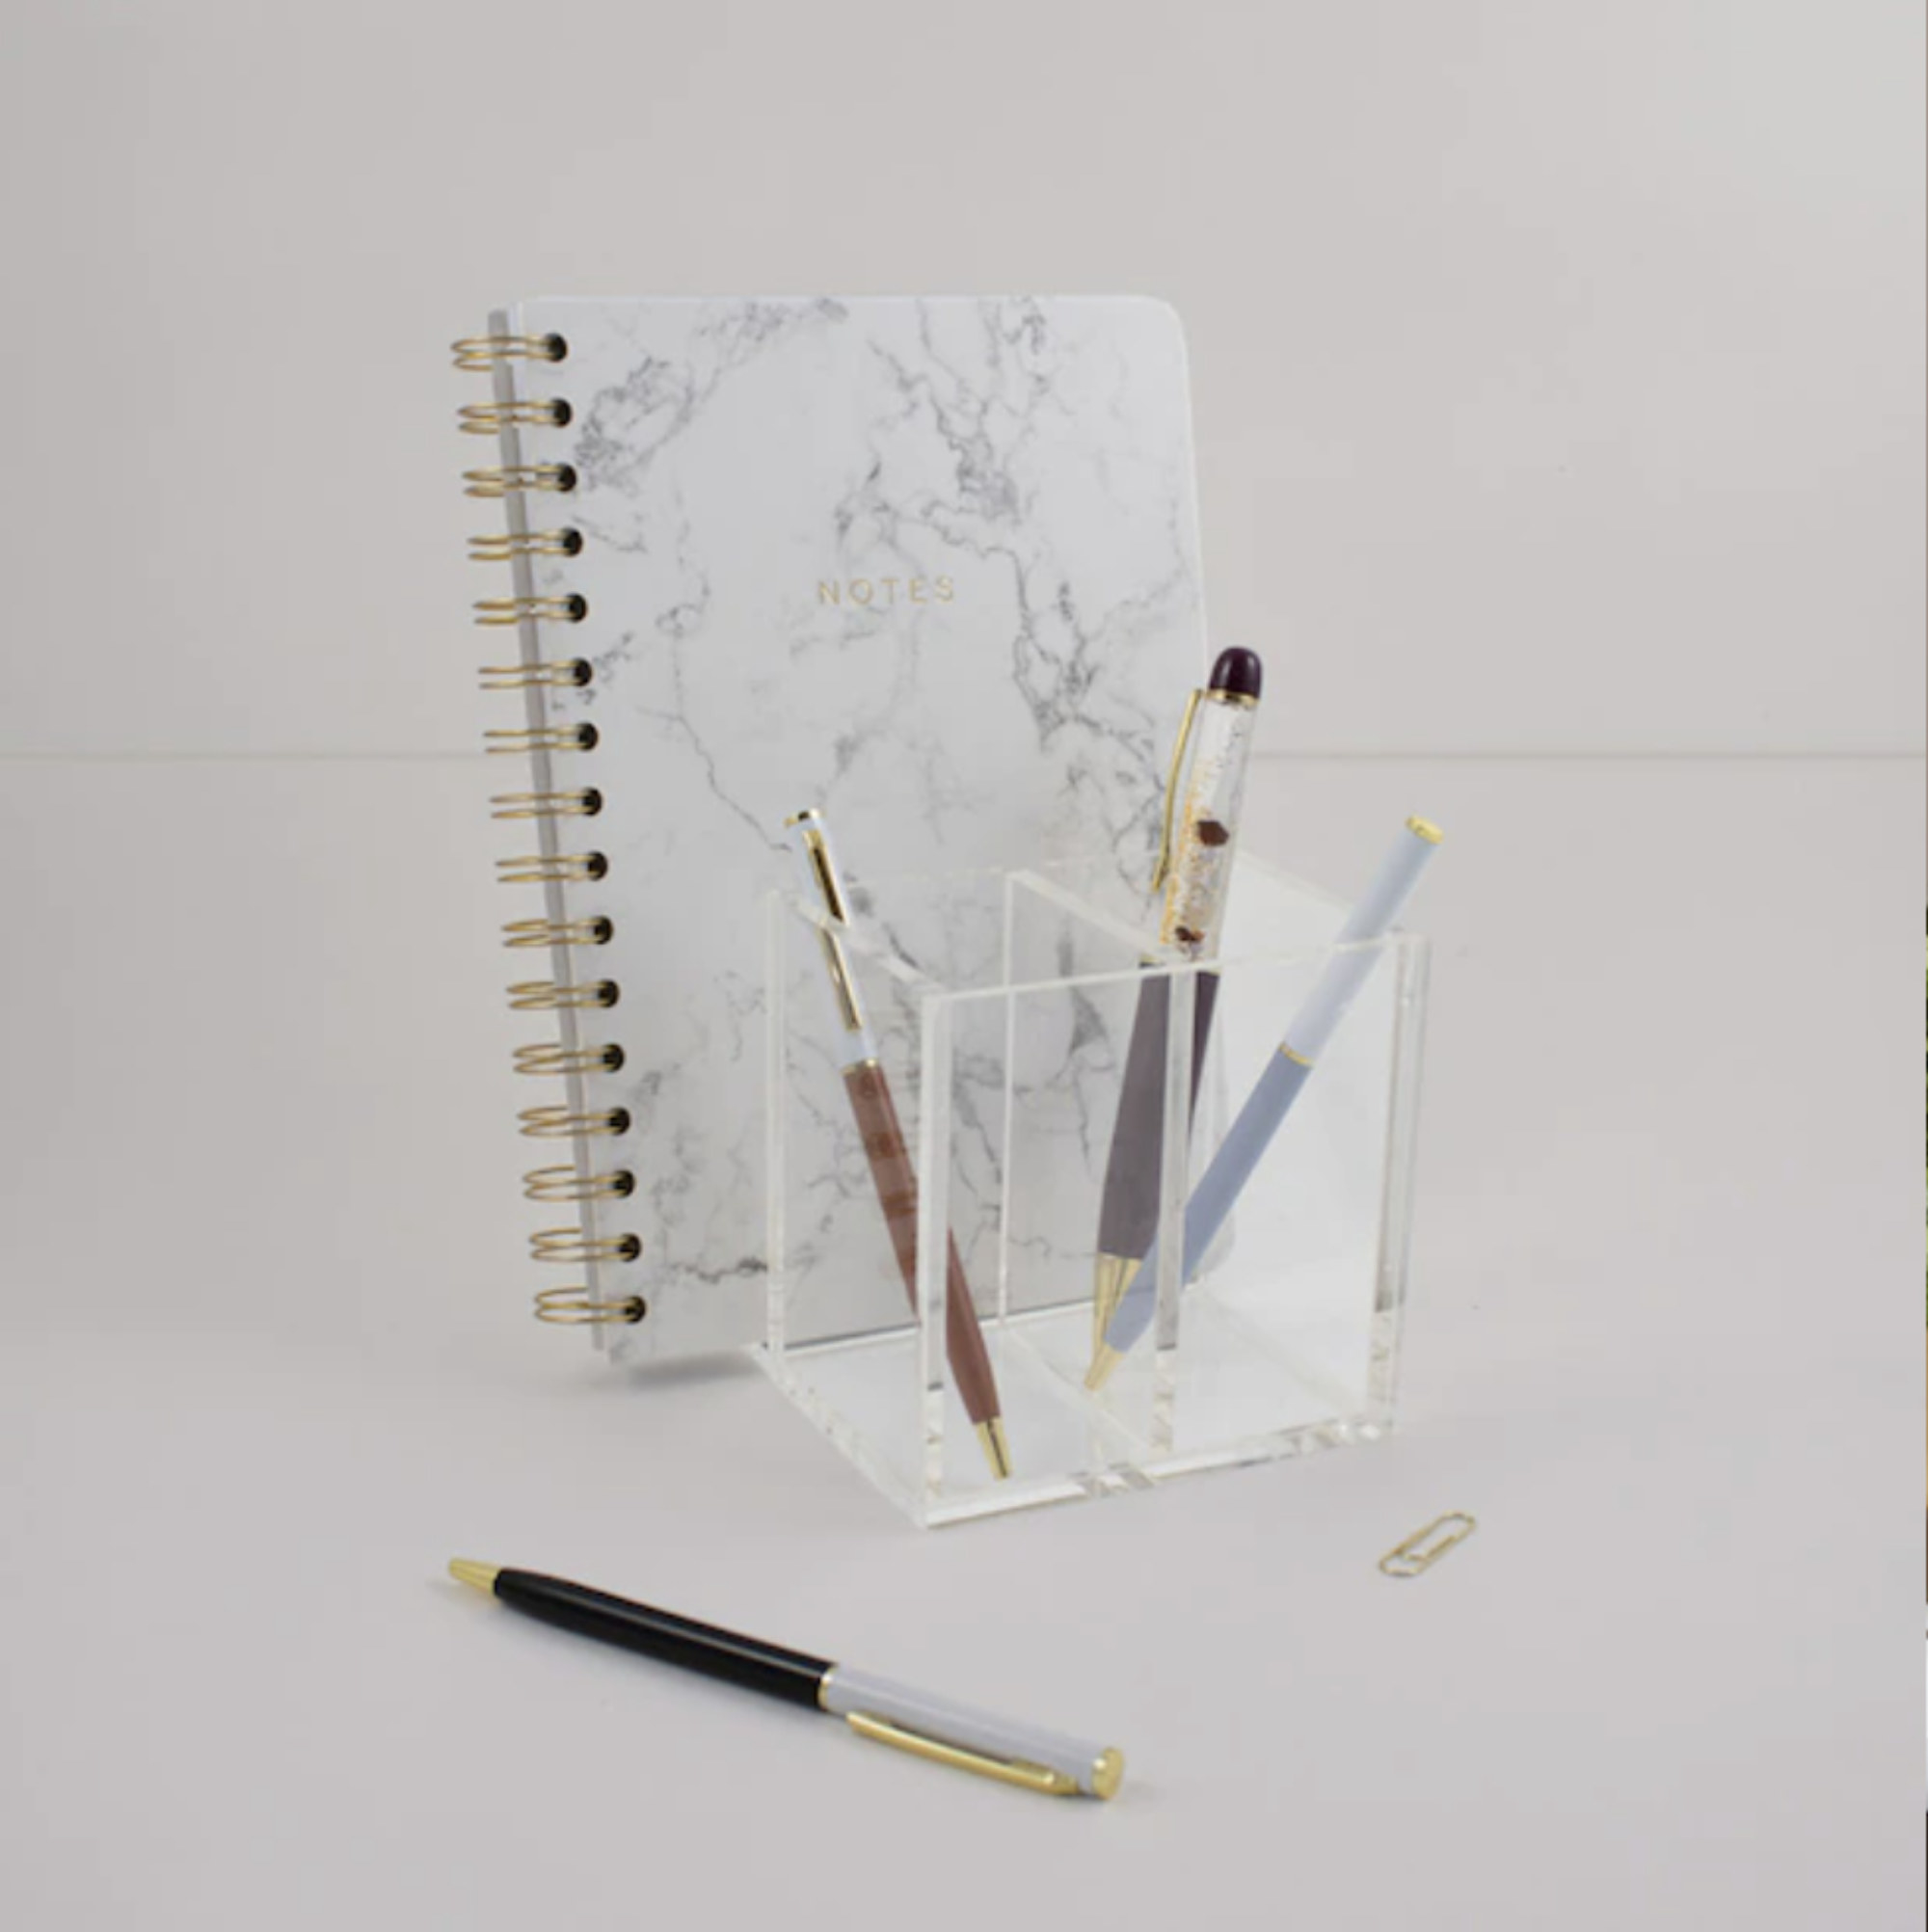 A square acrylic pencil holder with pens inside of it